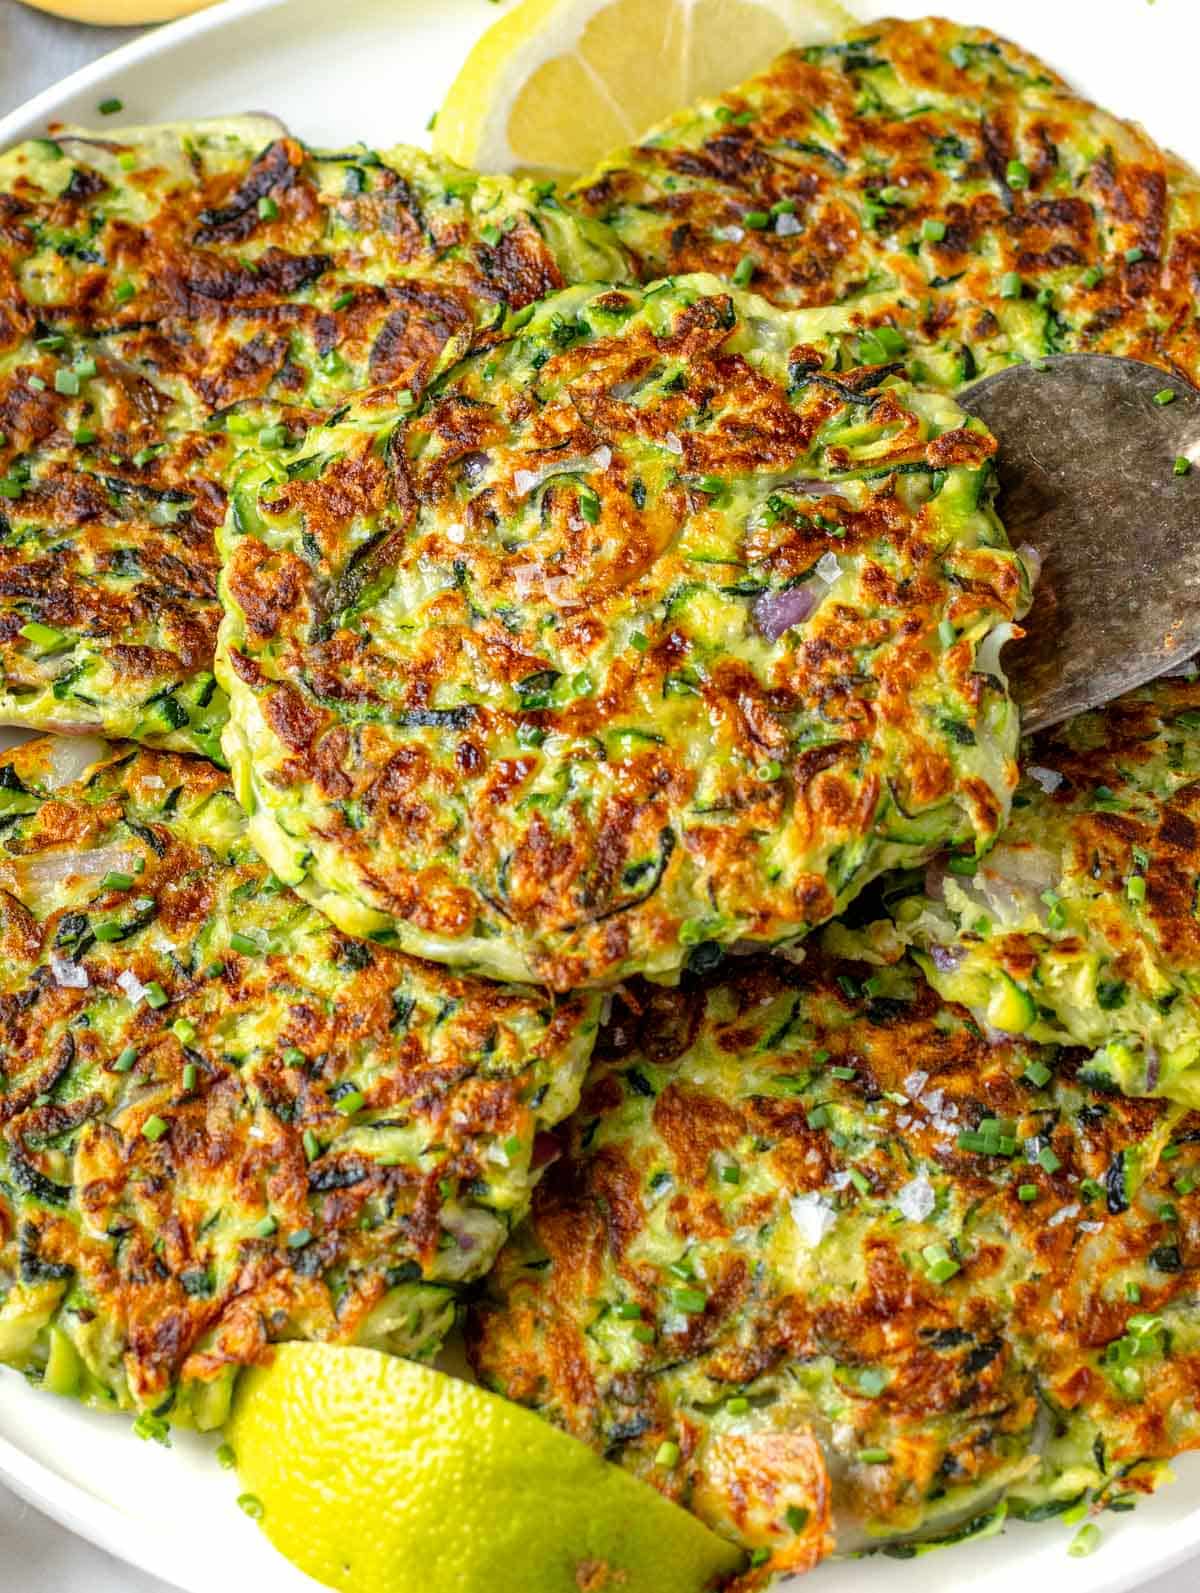 Zucchini fritters with lemon wedges and a silver spatula